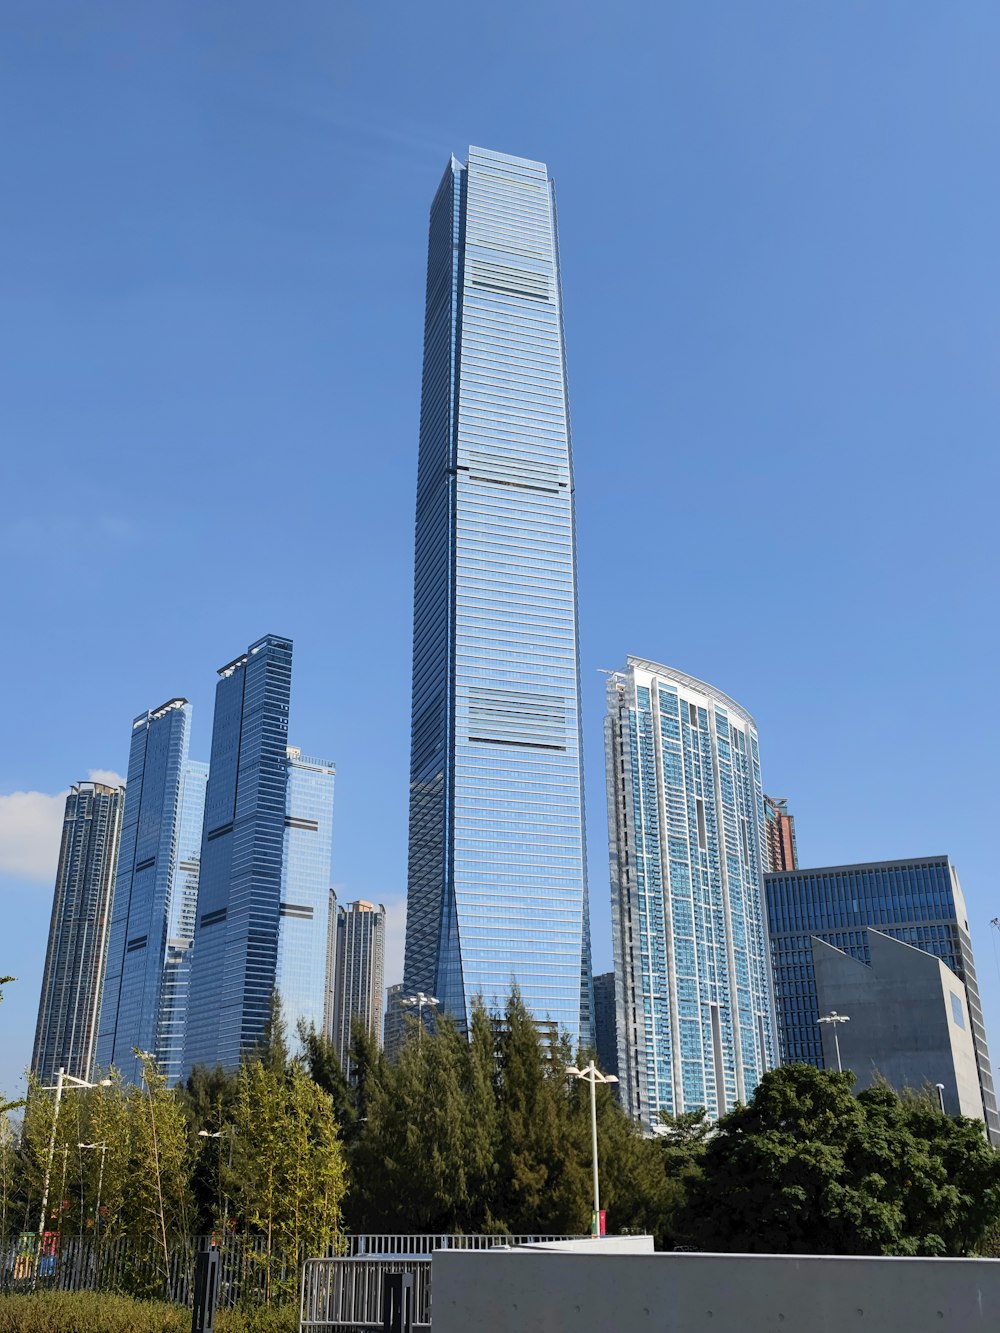 a tall building towering over a city filled with tall buildings